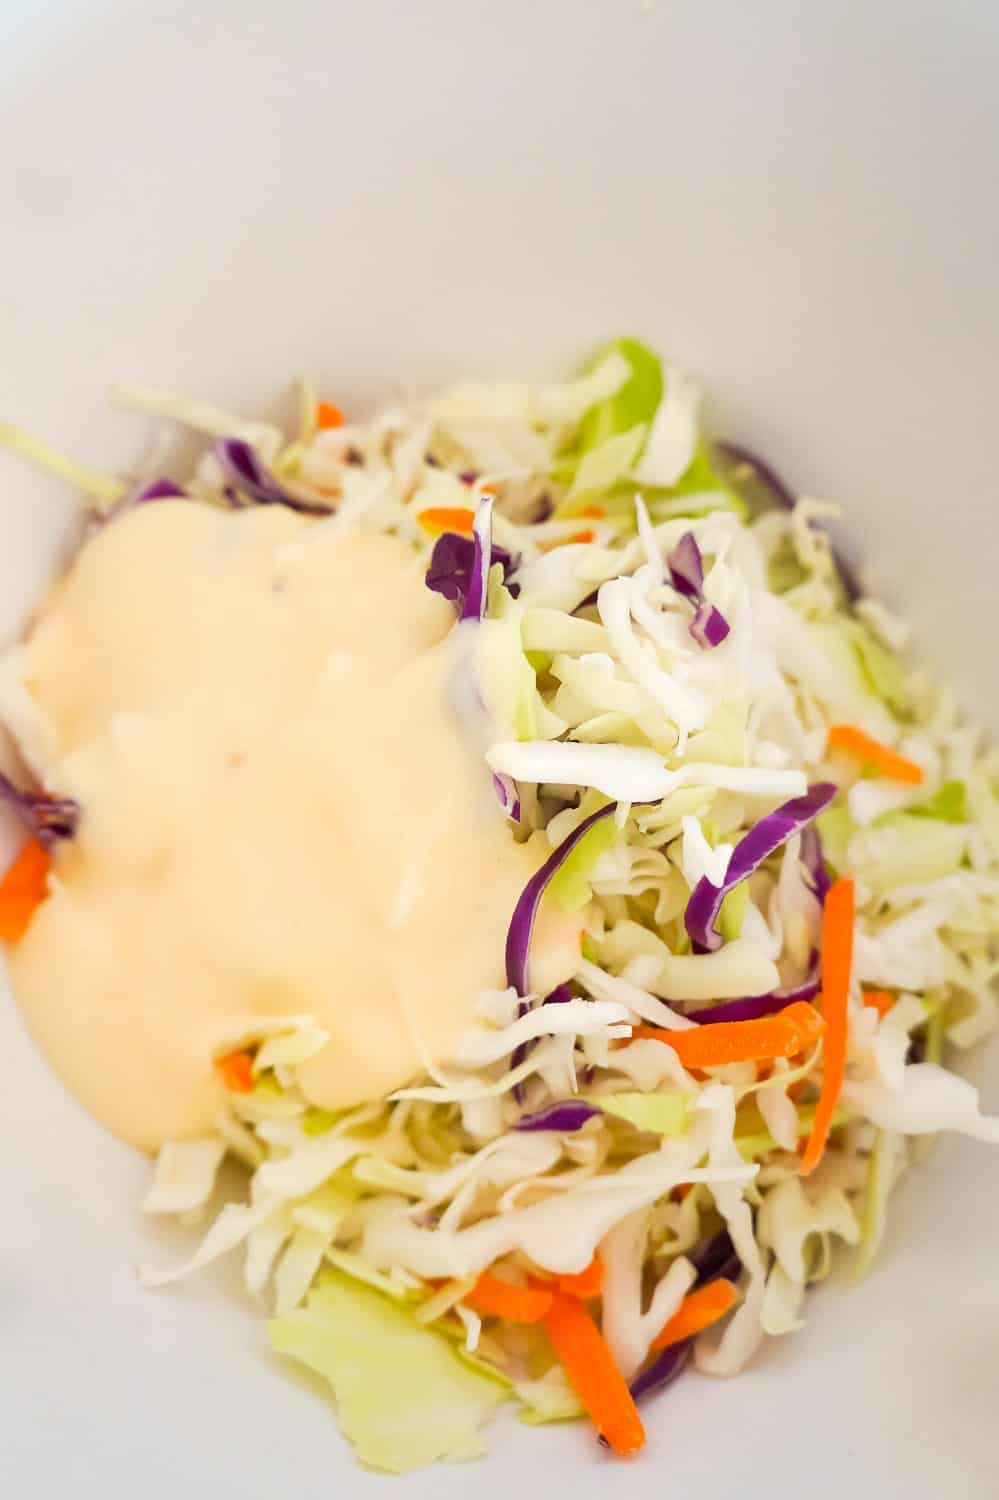 shredded coleslaw mix and creamy coleslaw dressing in a mixing bowl